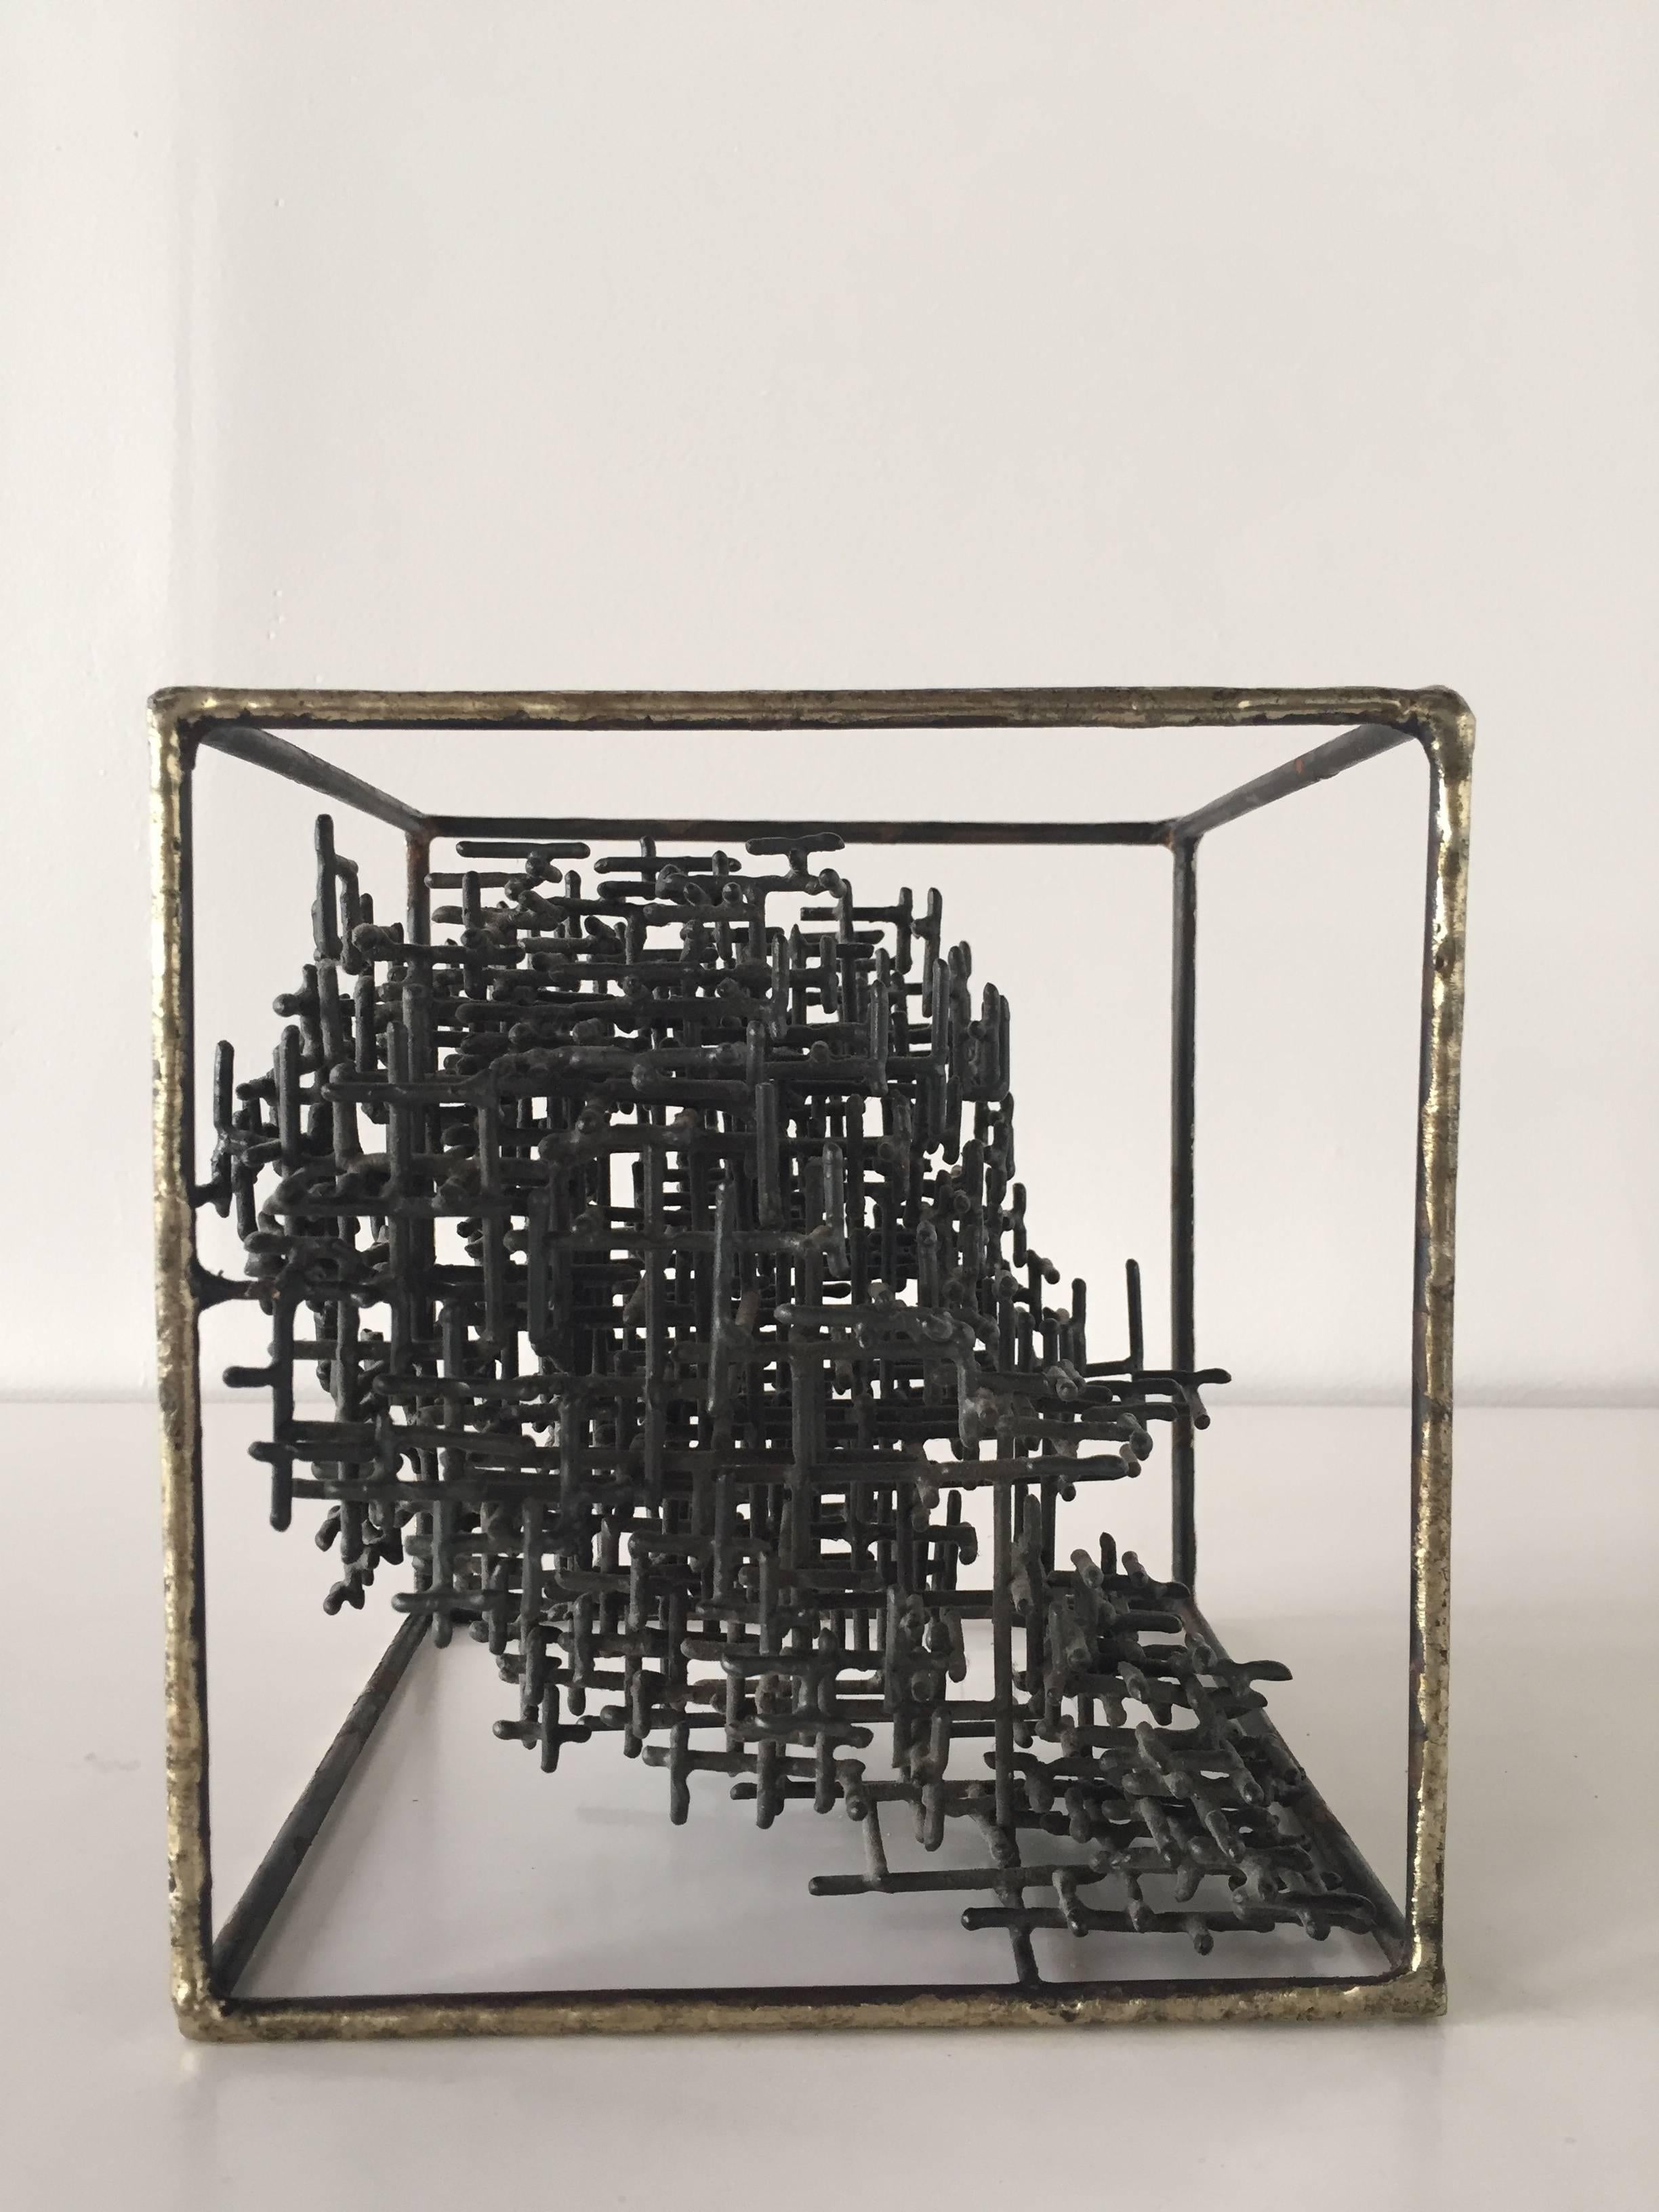 Mid-Century Modern metal sculpture with intricate cloud-like grid structure held in equilibrium inside a gold frame. Appears different from each angle. Impressive labor-intensive work. A beautiful modern artwork. Purchased in a gallery focused on